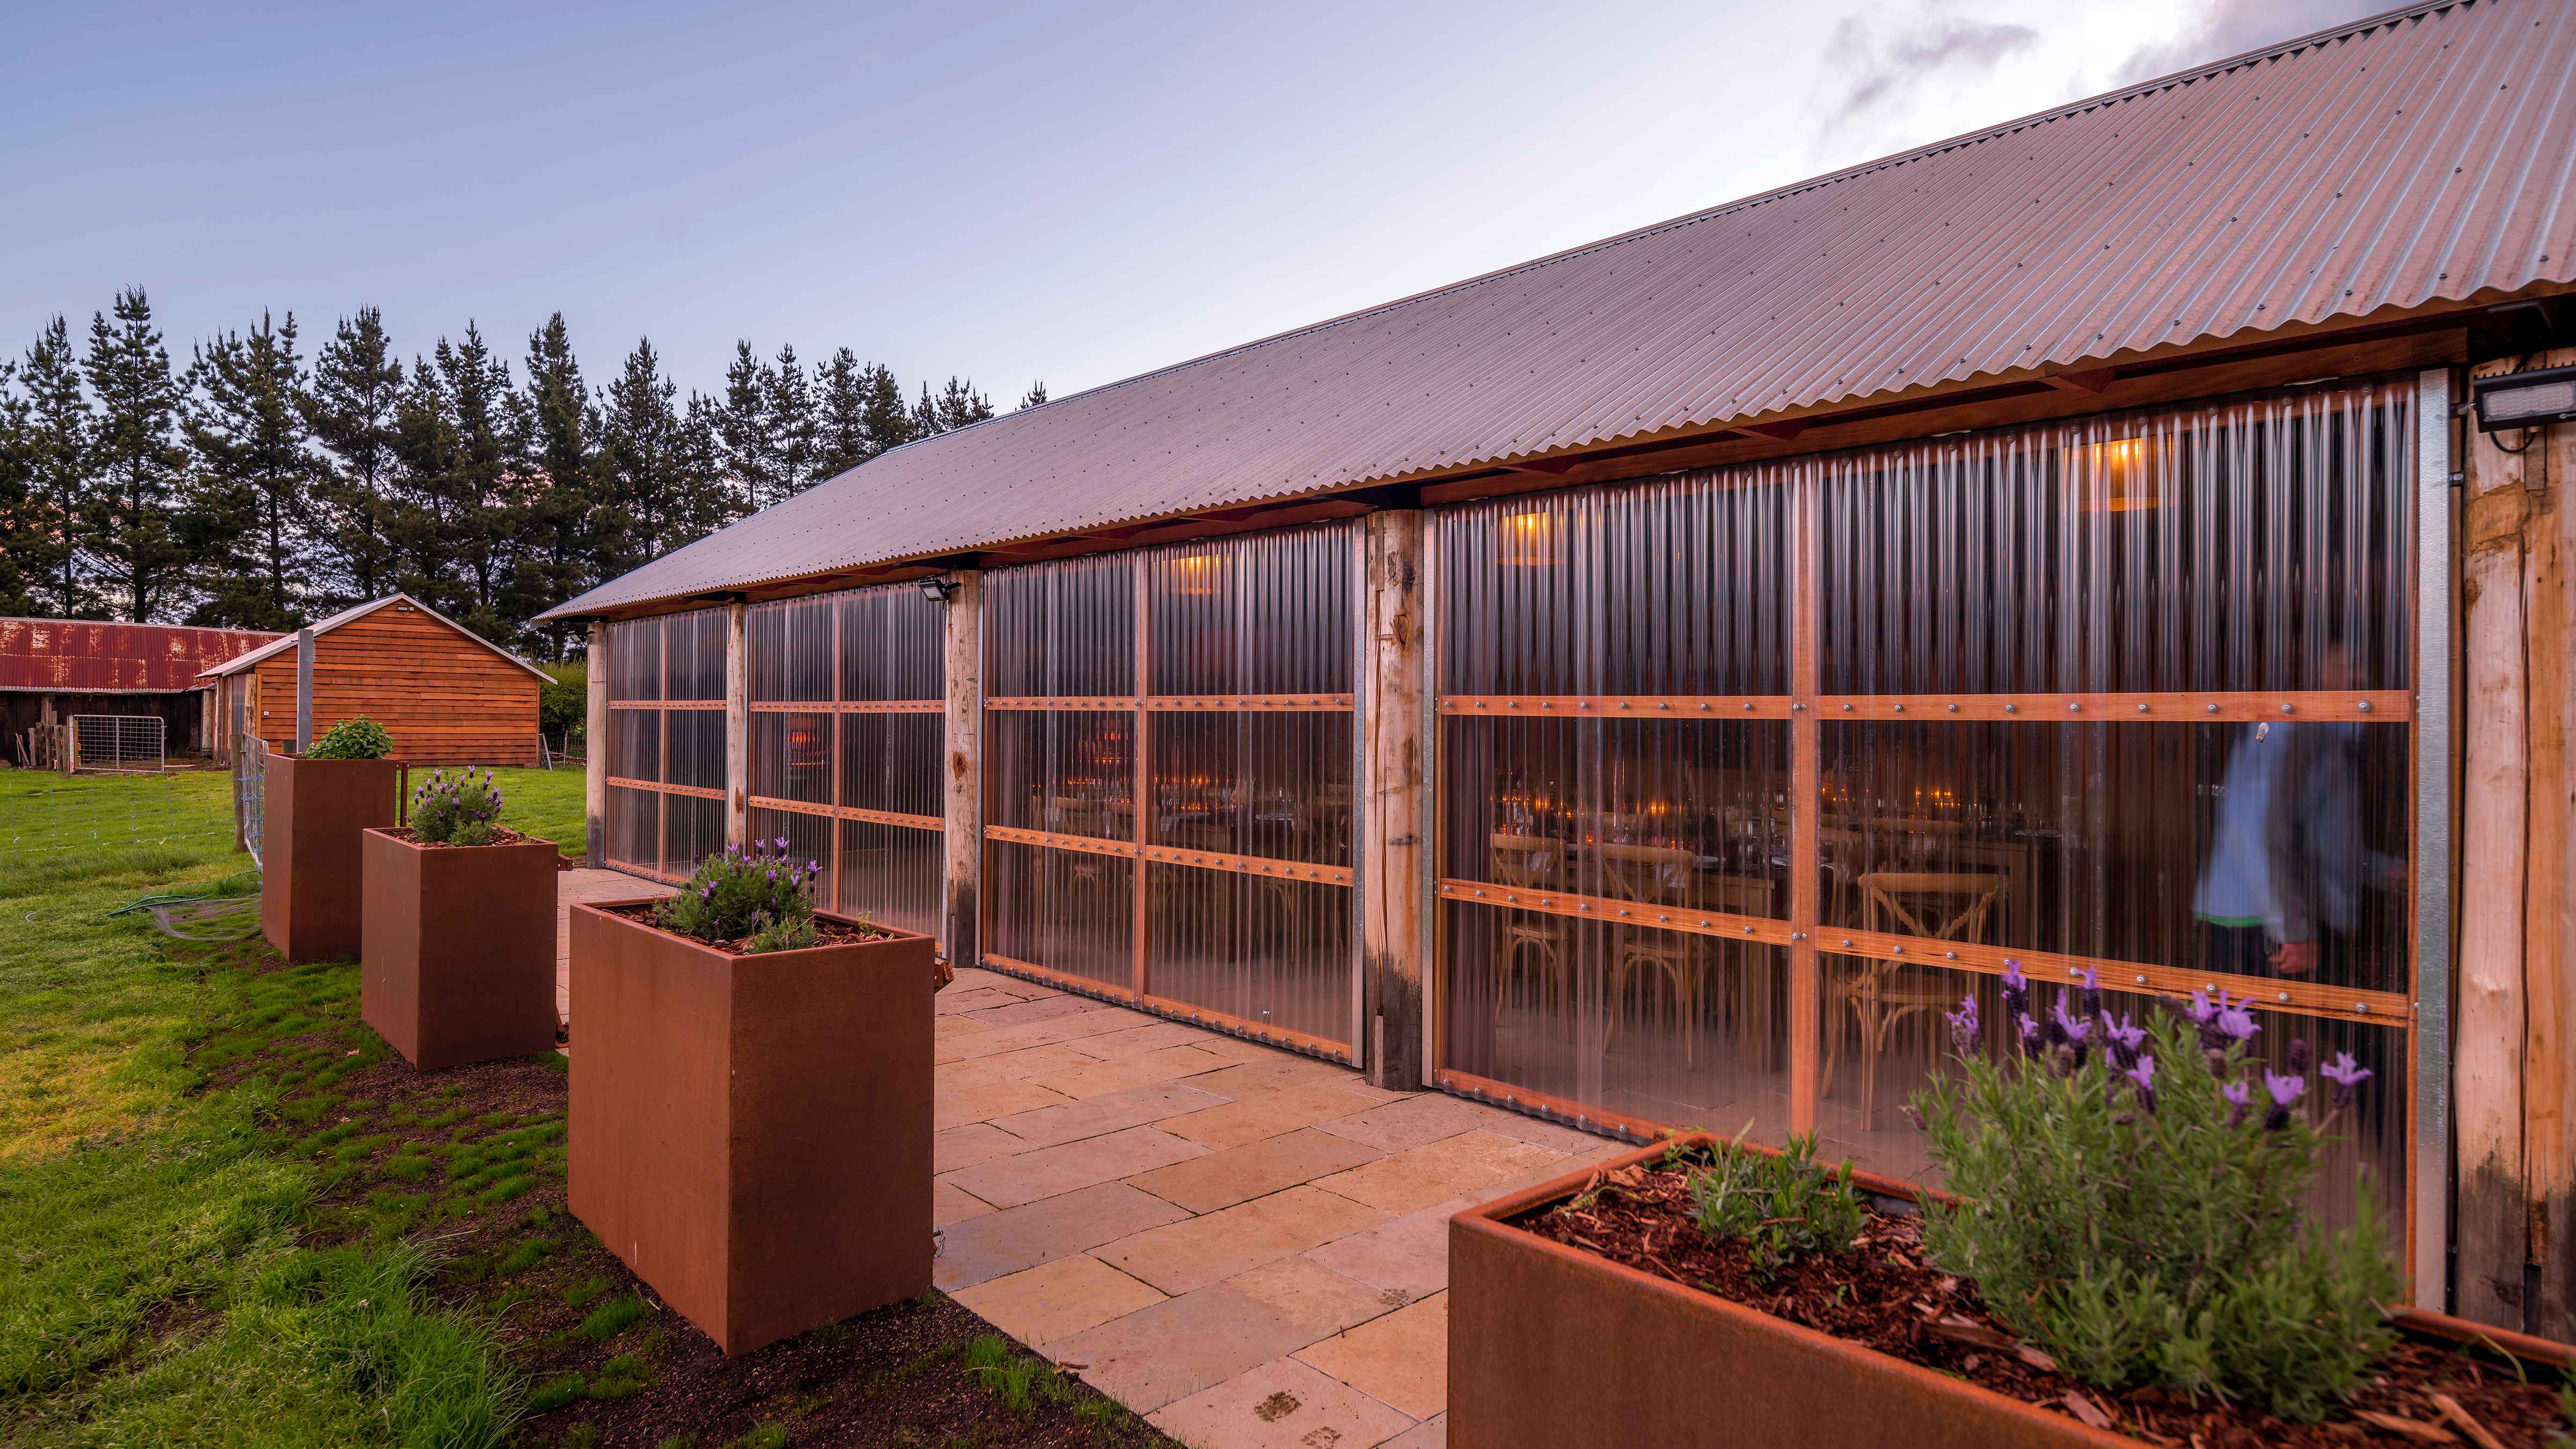 The Archery with its clear laserlight doors closed in the evening light. The building has a corrugated iron roof. Vertical corrugation laserlight walls and limestone pavers are bordered by iron planter boxes and grass. Photo: Rob Burnett.